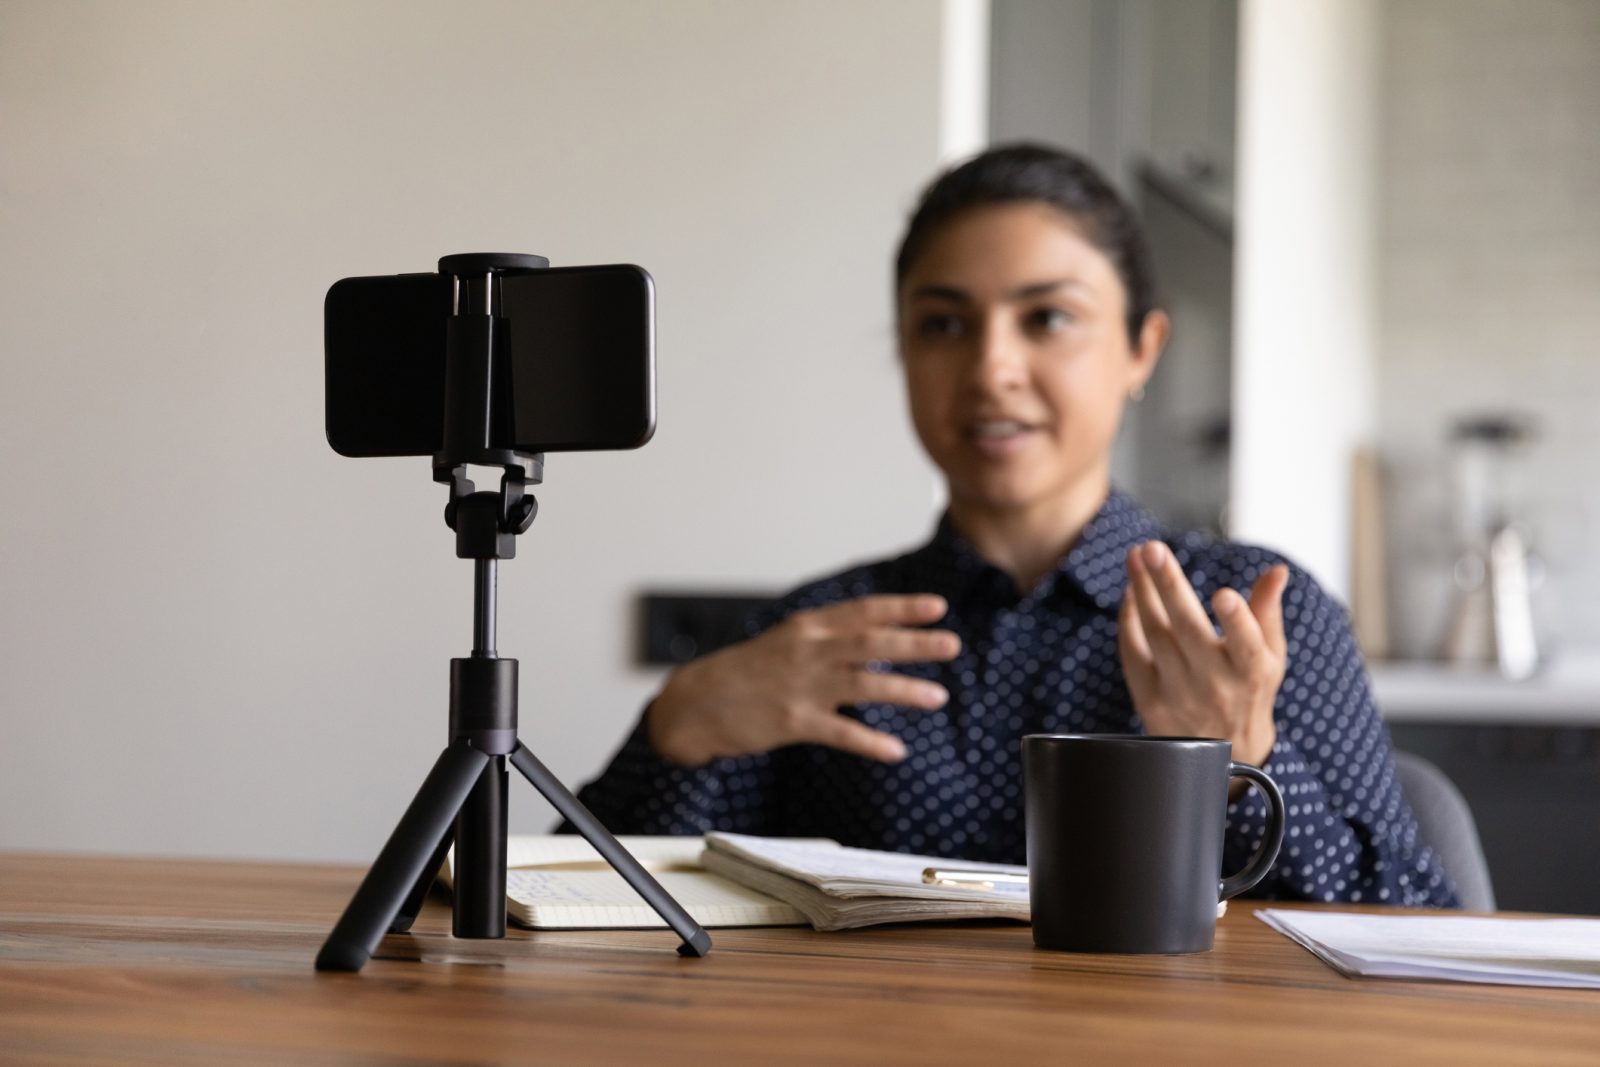 A woman sits at a table speaking at a phone on a tripod that is facing her.